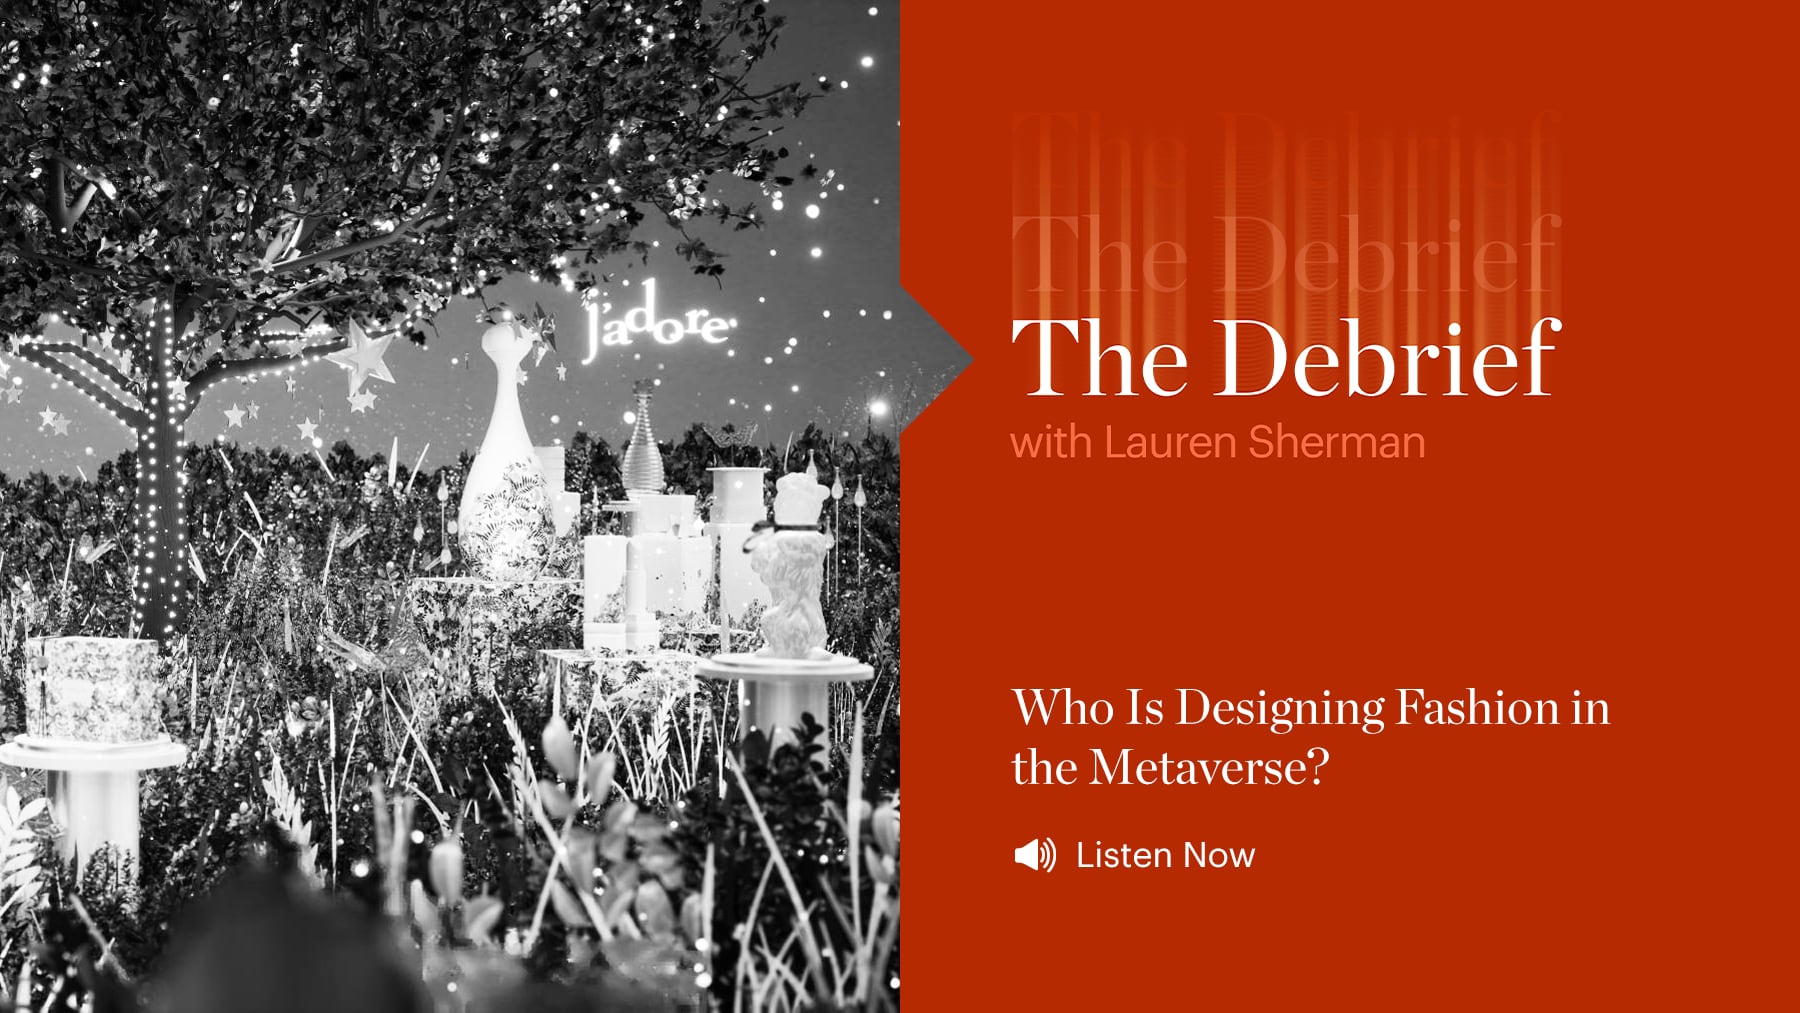 The Debrief: Who Is Designing Fashion in the Metaverse? 6BHA6J7CLFFGJLSZ26HT6UHVEA